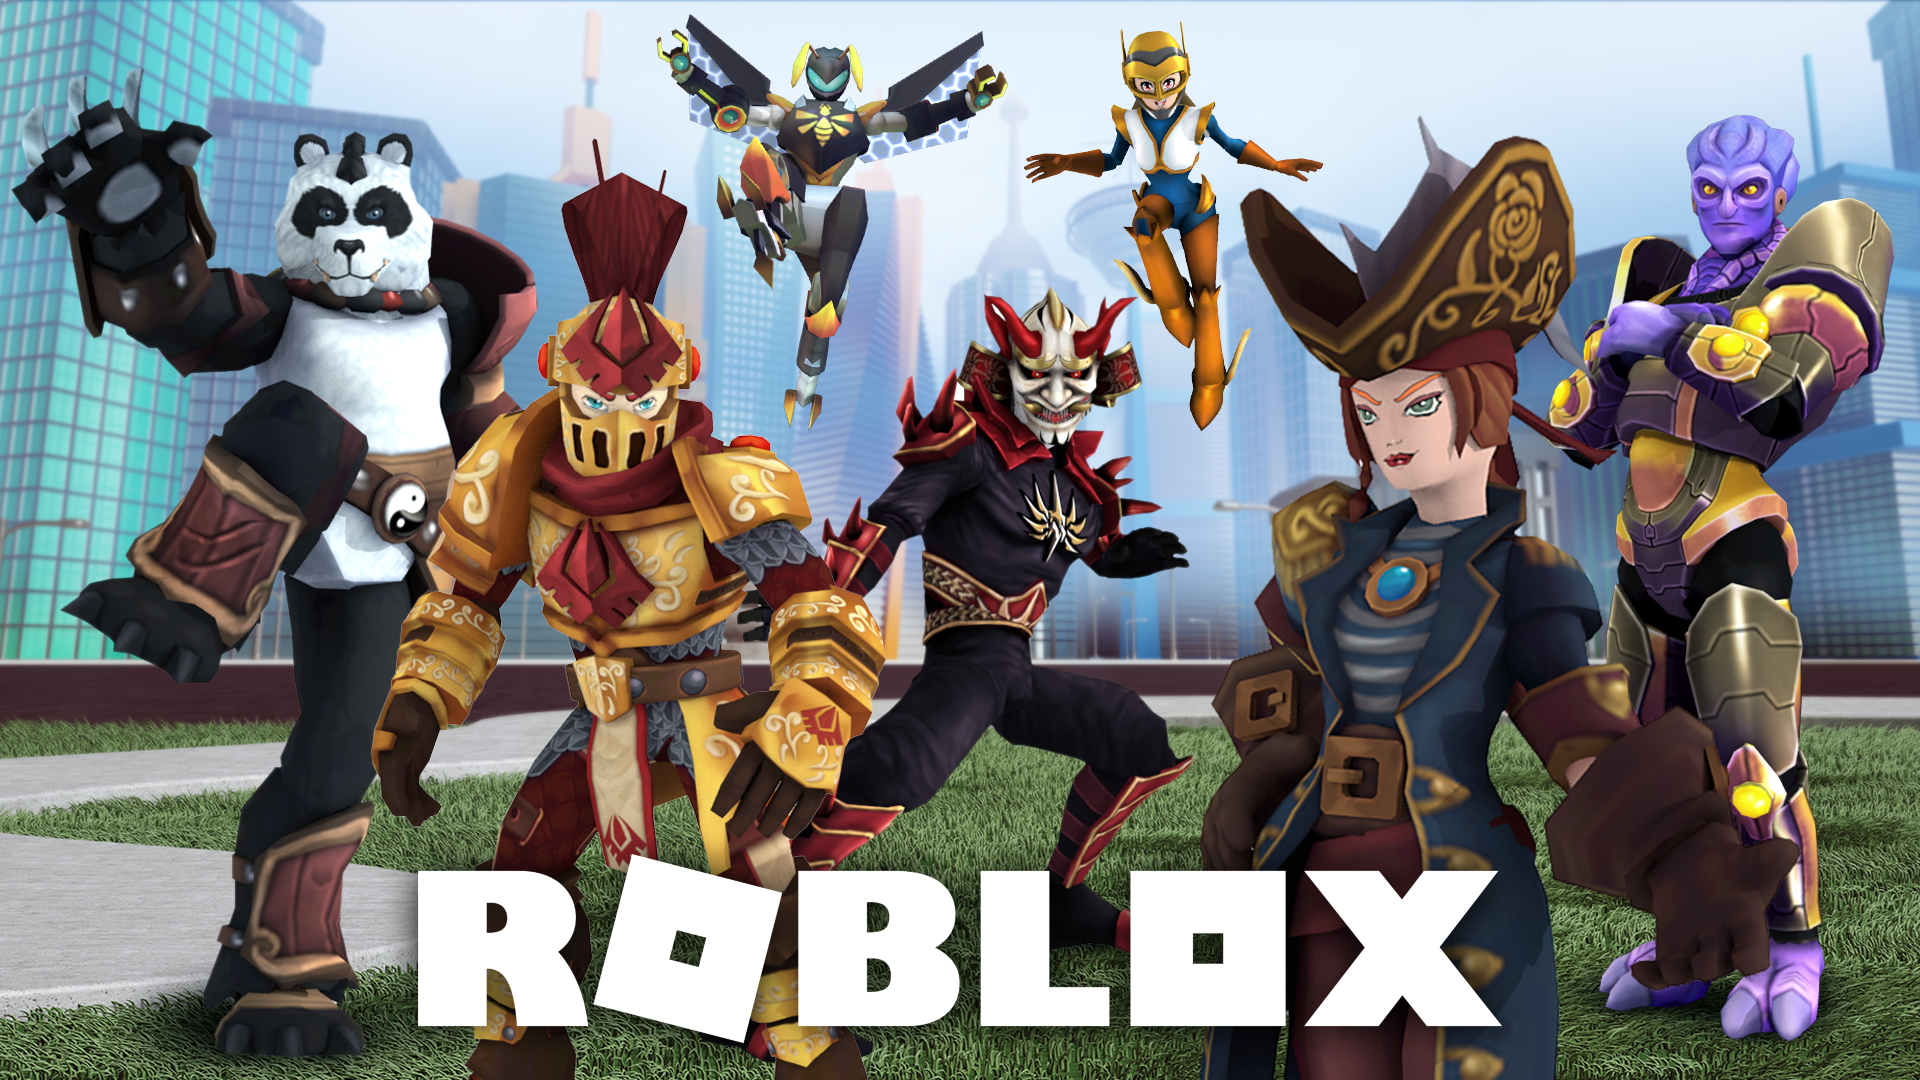 Game Design With Roblox For Kids Code For Fun - roblox studio tumblr